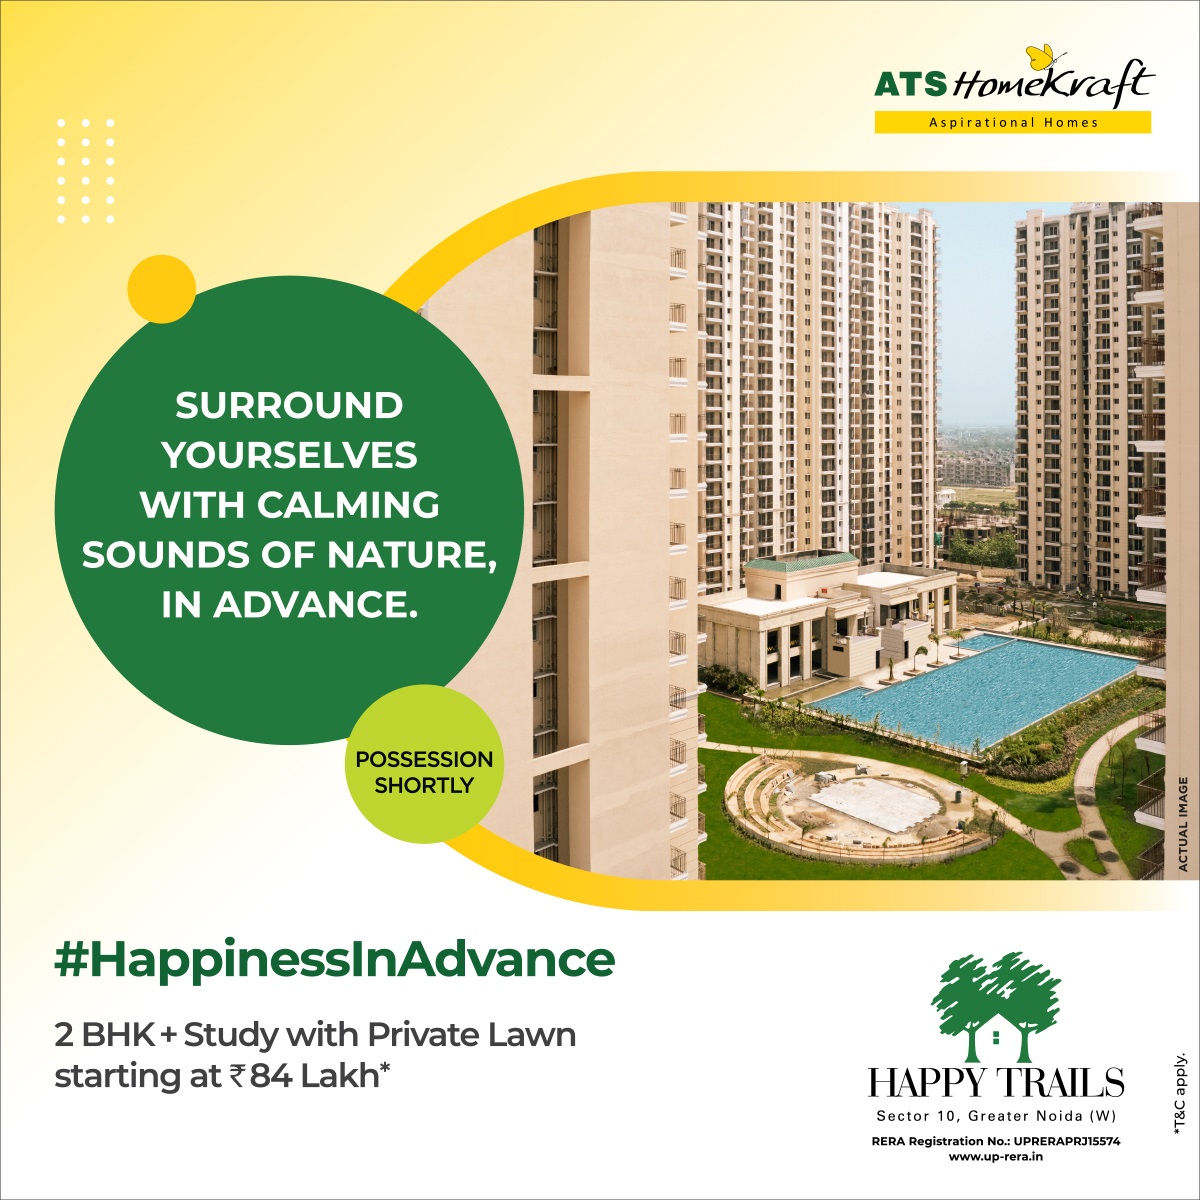 Book 2.5 BHK with private lawn starting Rs 84 Lac onwards at ATS HomeKraft Happy Trails in Greater Noida